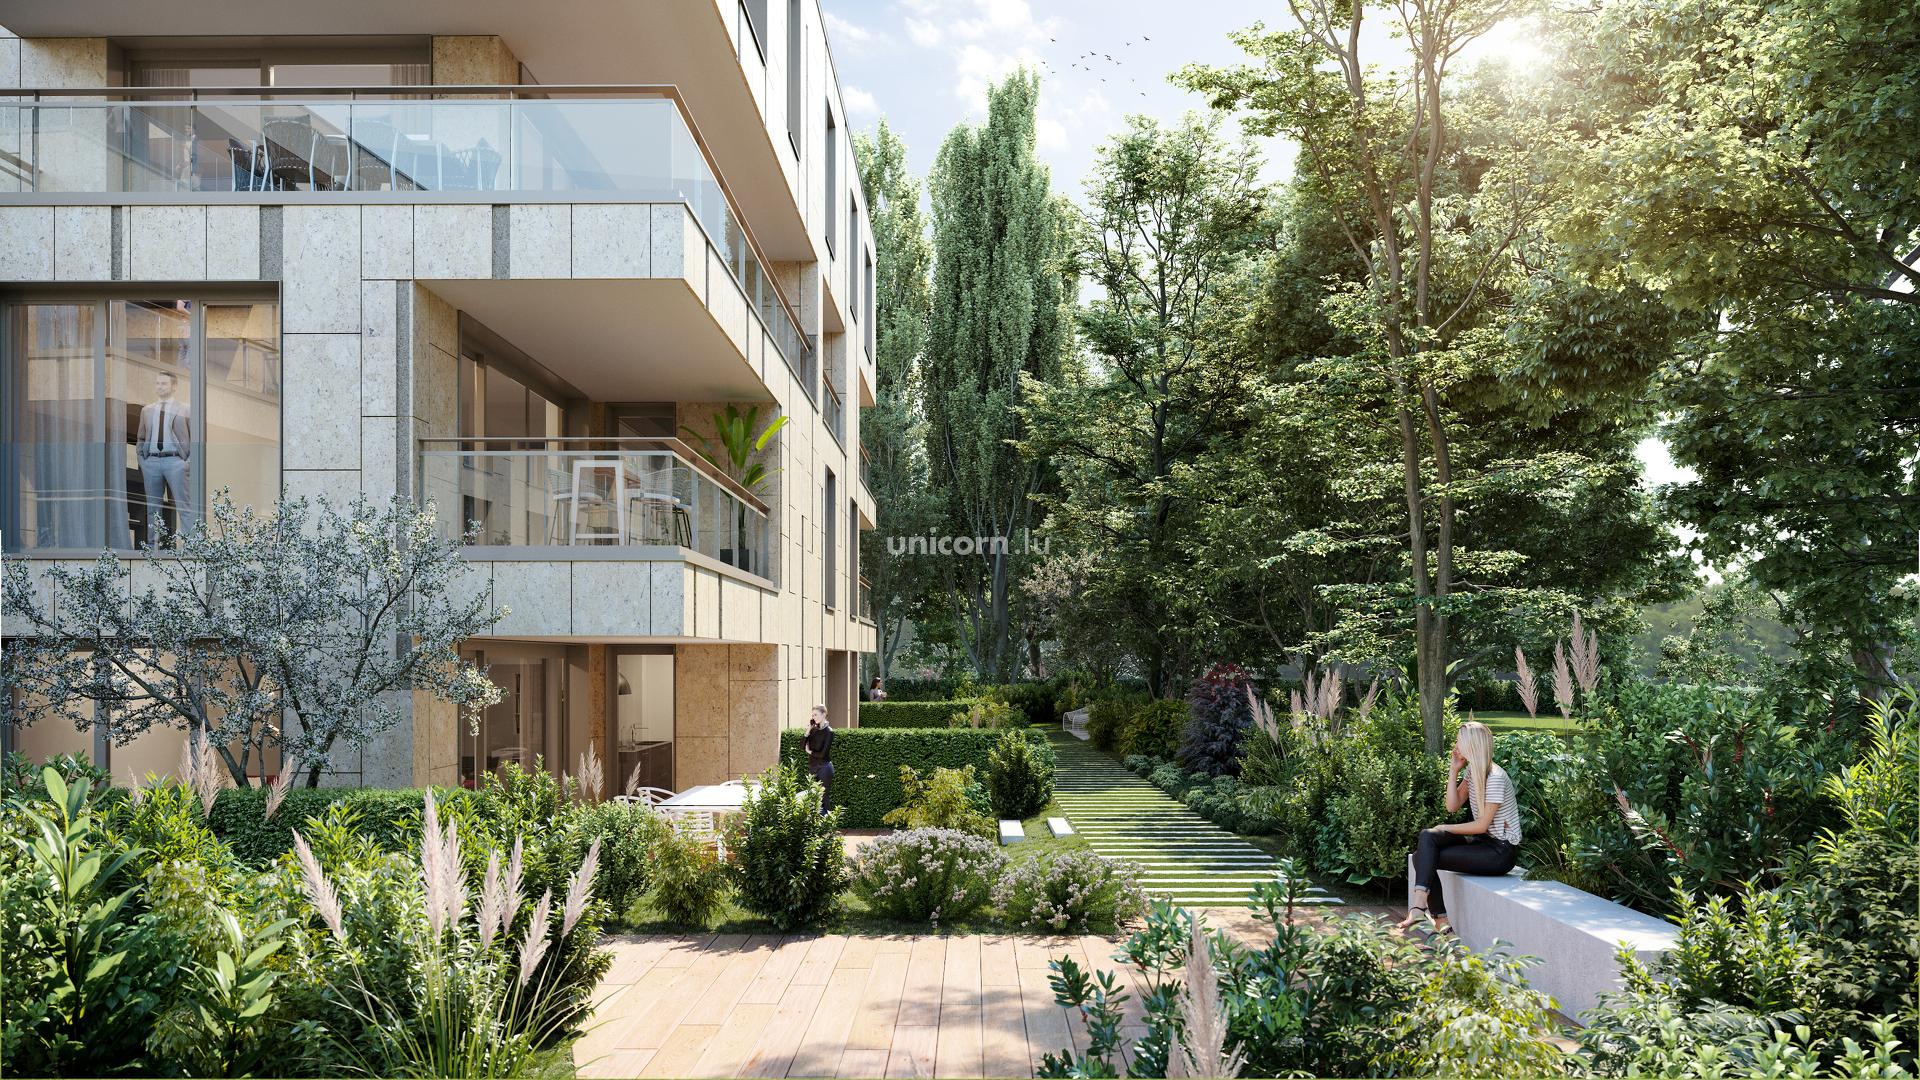  Domaine Petit Parc  - Real estate project in Luxembourg-Belair